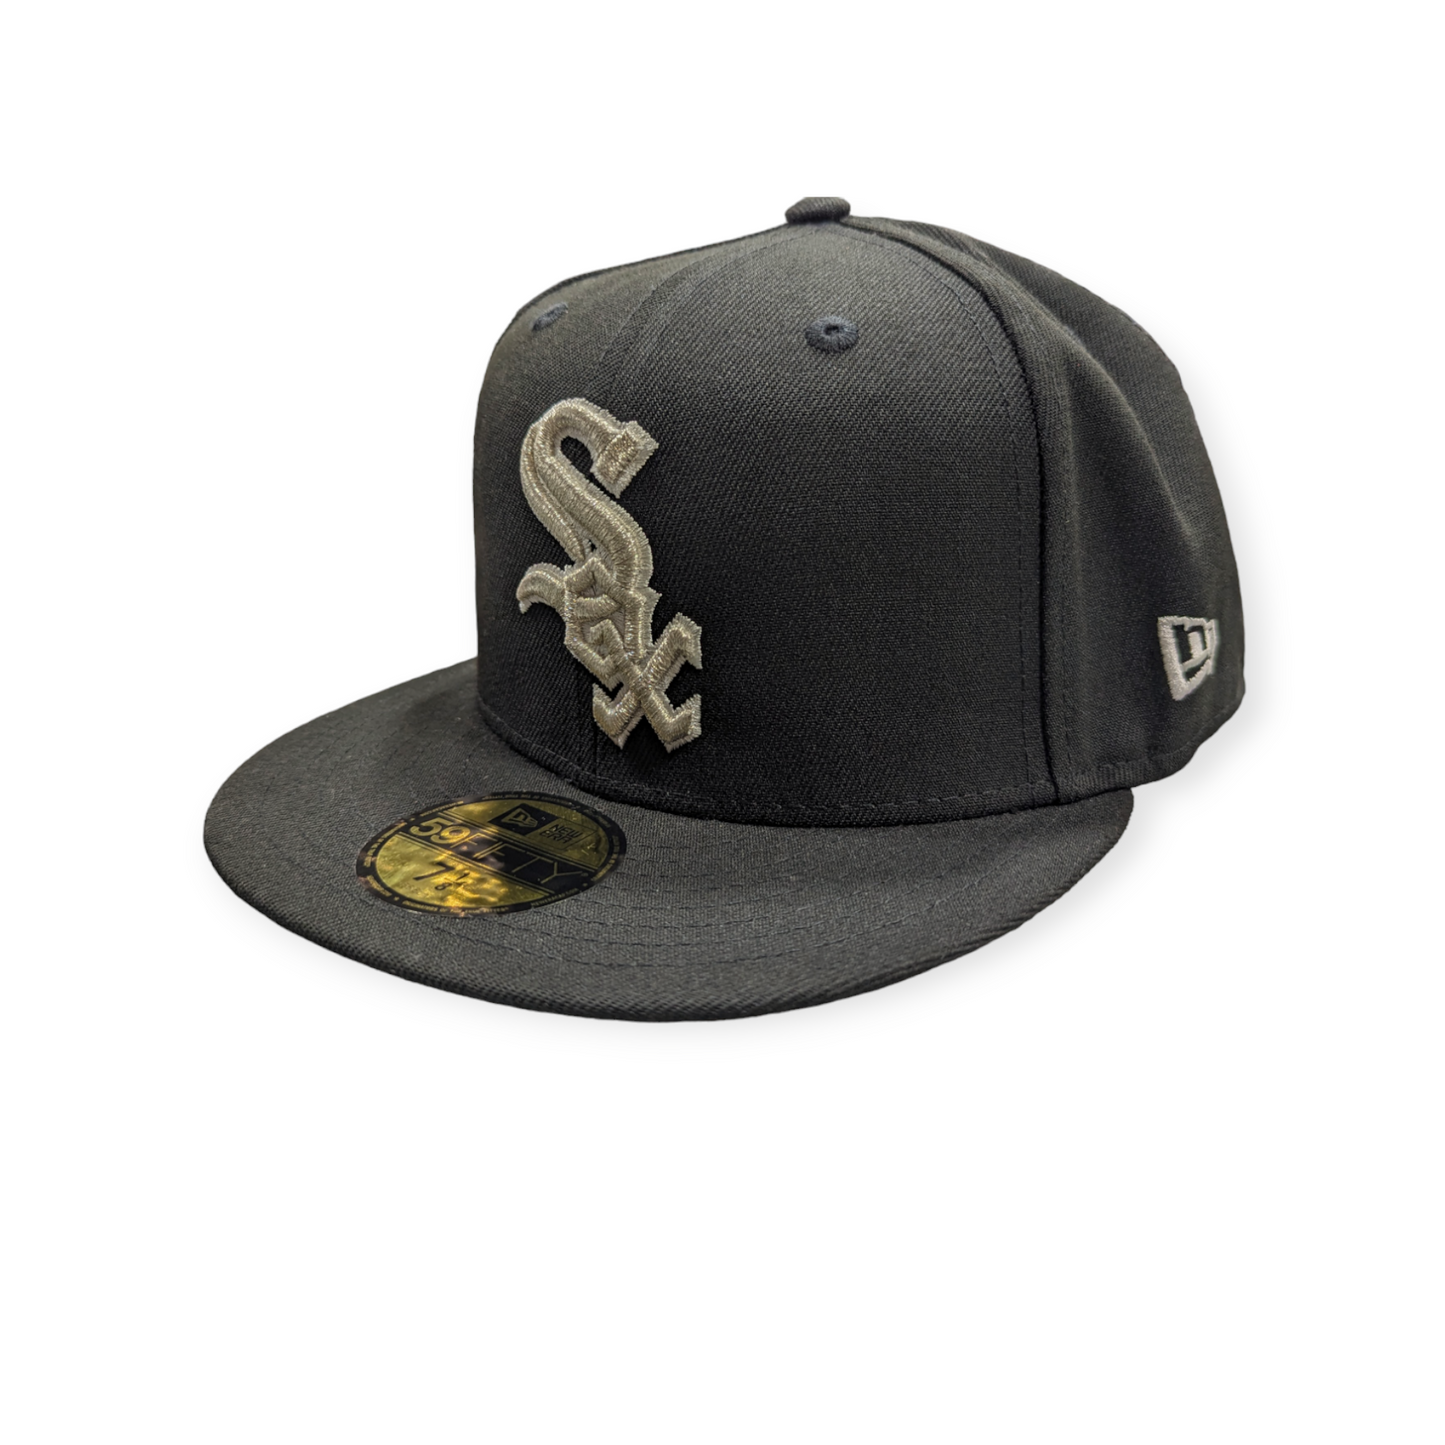 Chicago White Sox Black/Platinum New Era 2005 World Series 59FIFTY Fitted Hat